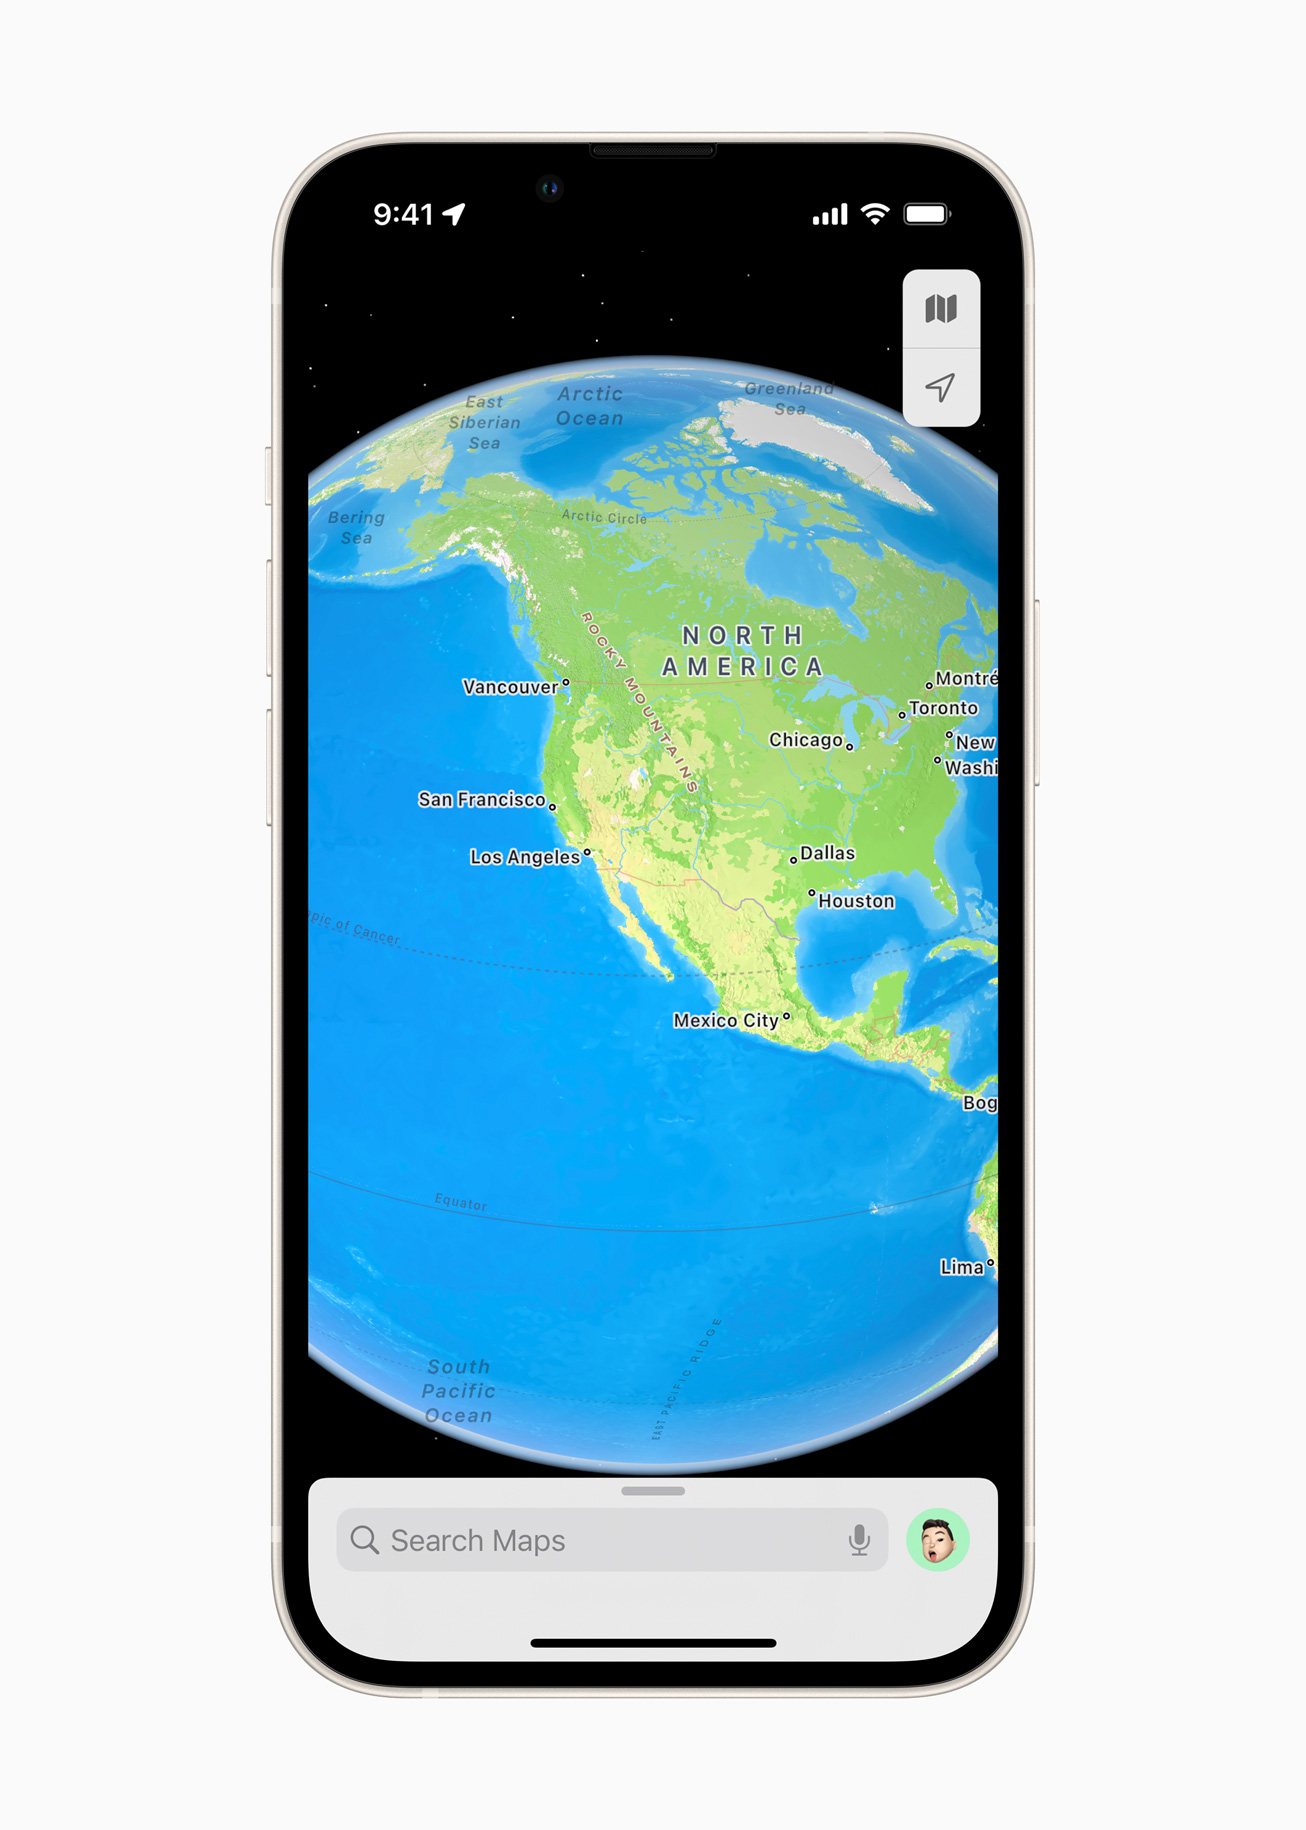 Apple Maps introduces 3D street-level and 360-degree view to explore major cities.